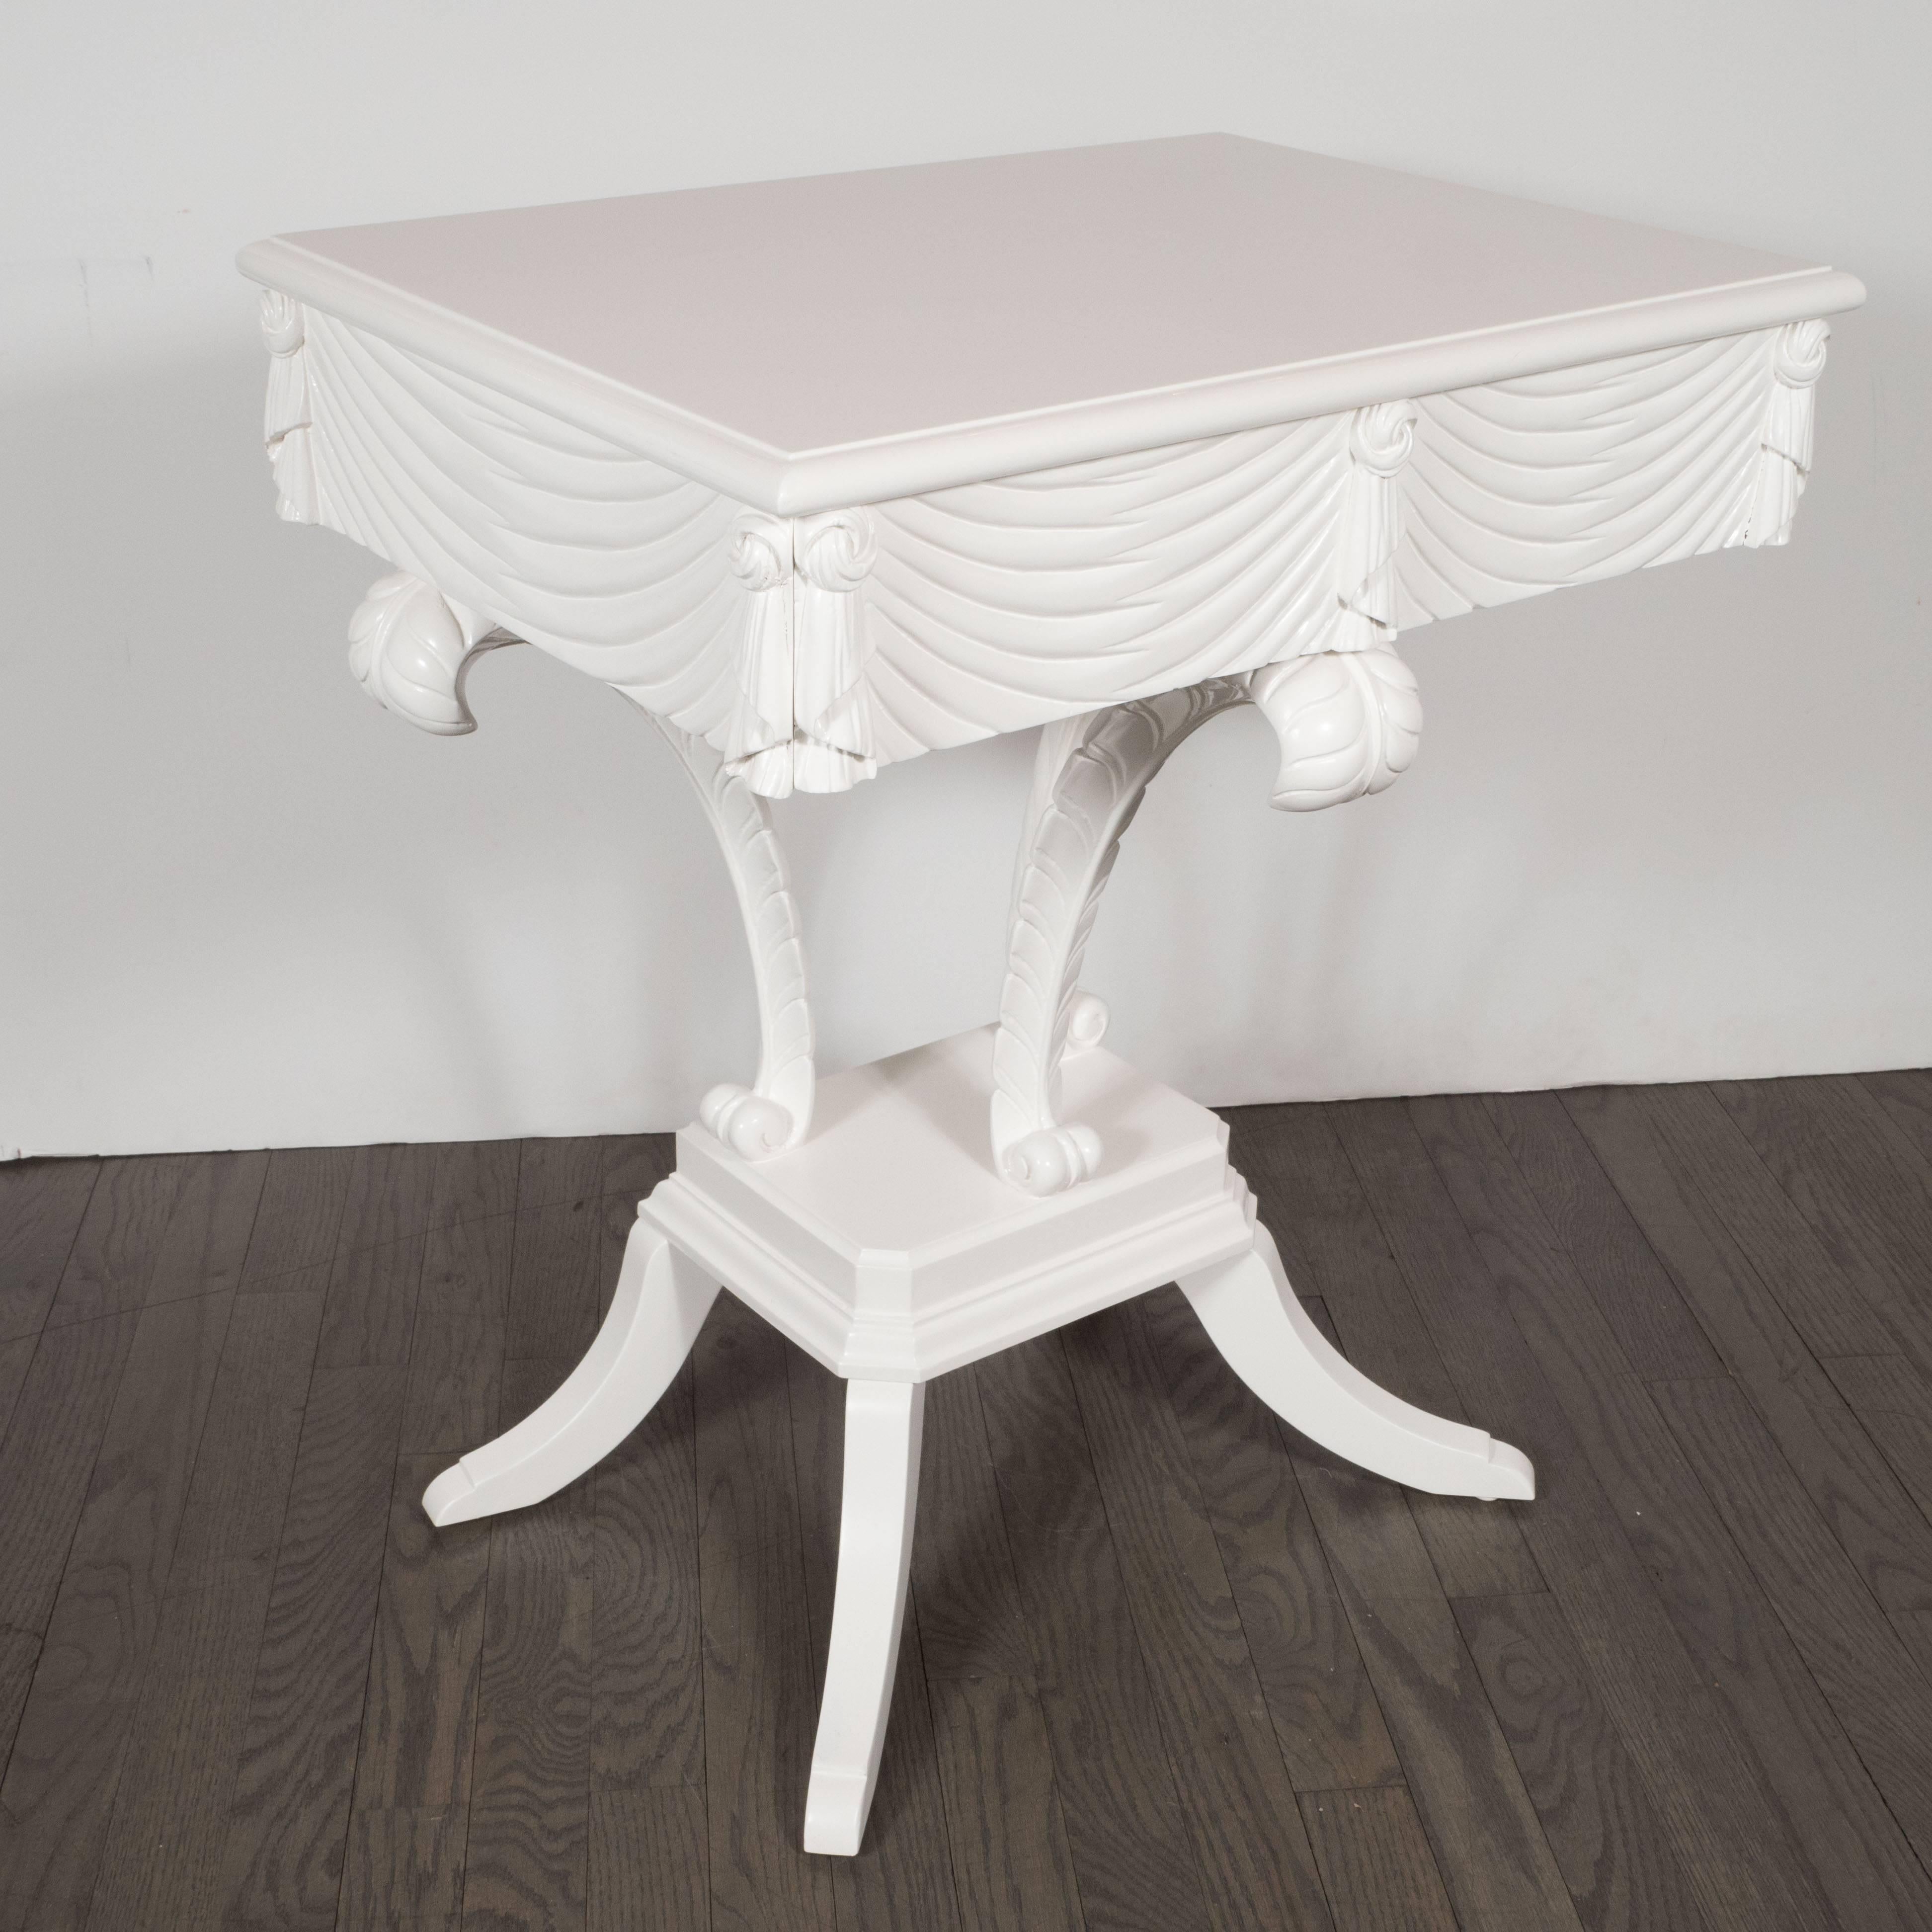 This stunning pair of white lacquer end tables were realized by the illustrious American firm, Grosfeld House- where legendary designers such as Lorin Jackson got their start, circa 1945. Recalling the glamour and old world sophistication typical of